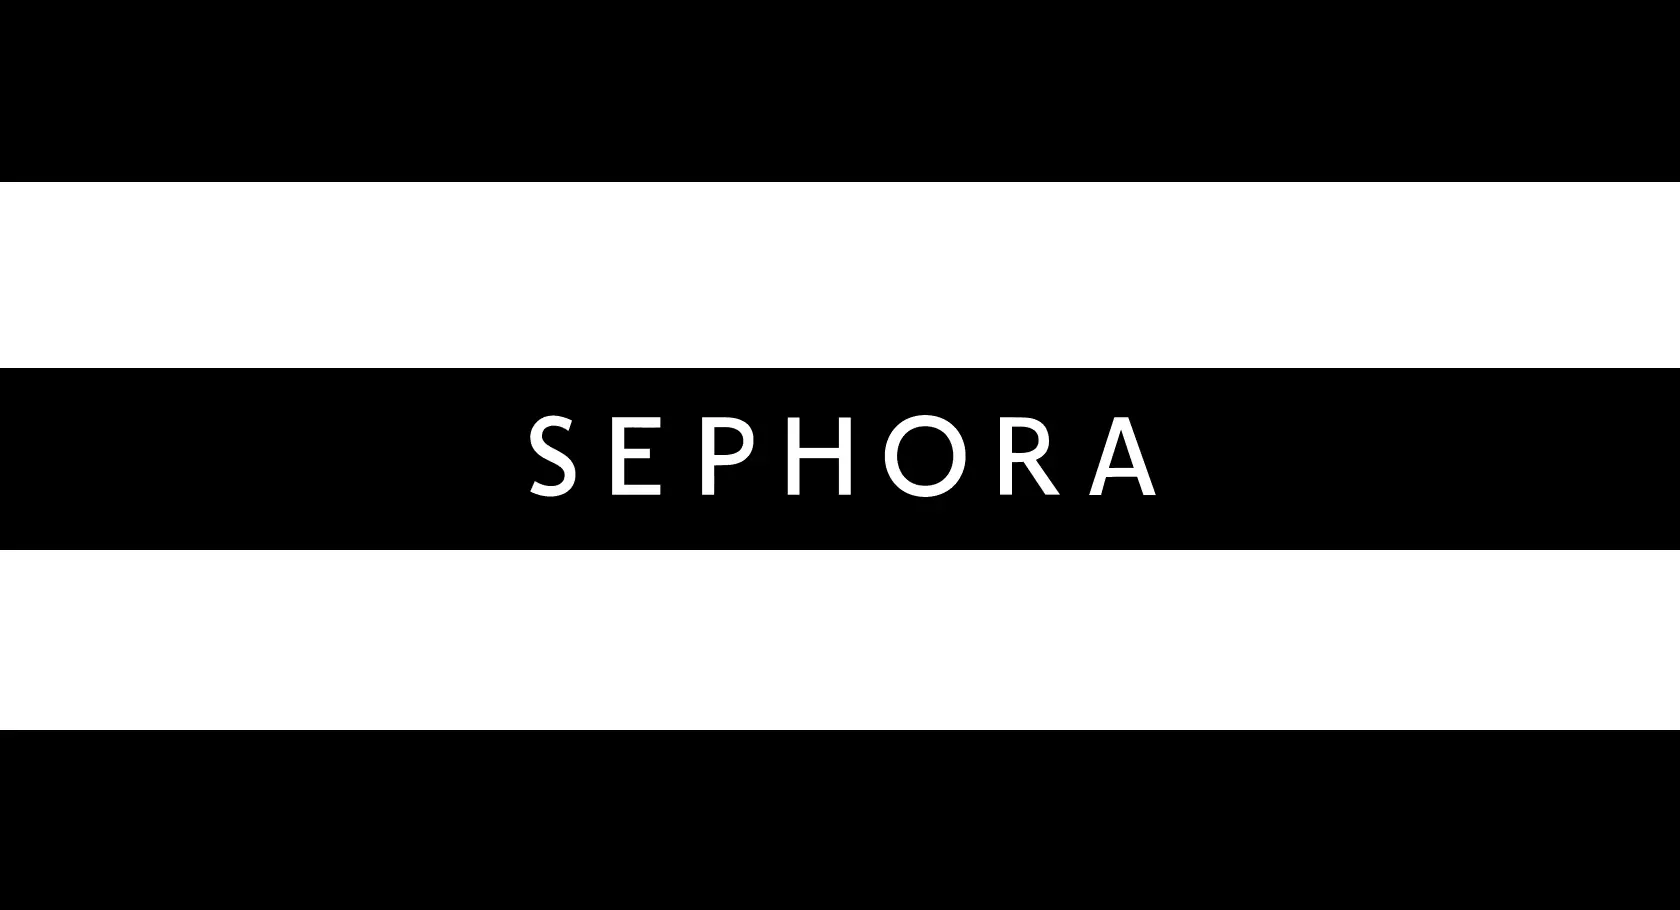 Can You Use a JCPenney Gift Card At Sephora